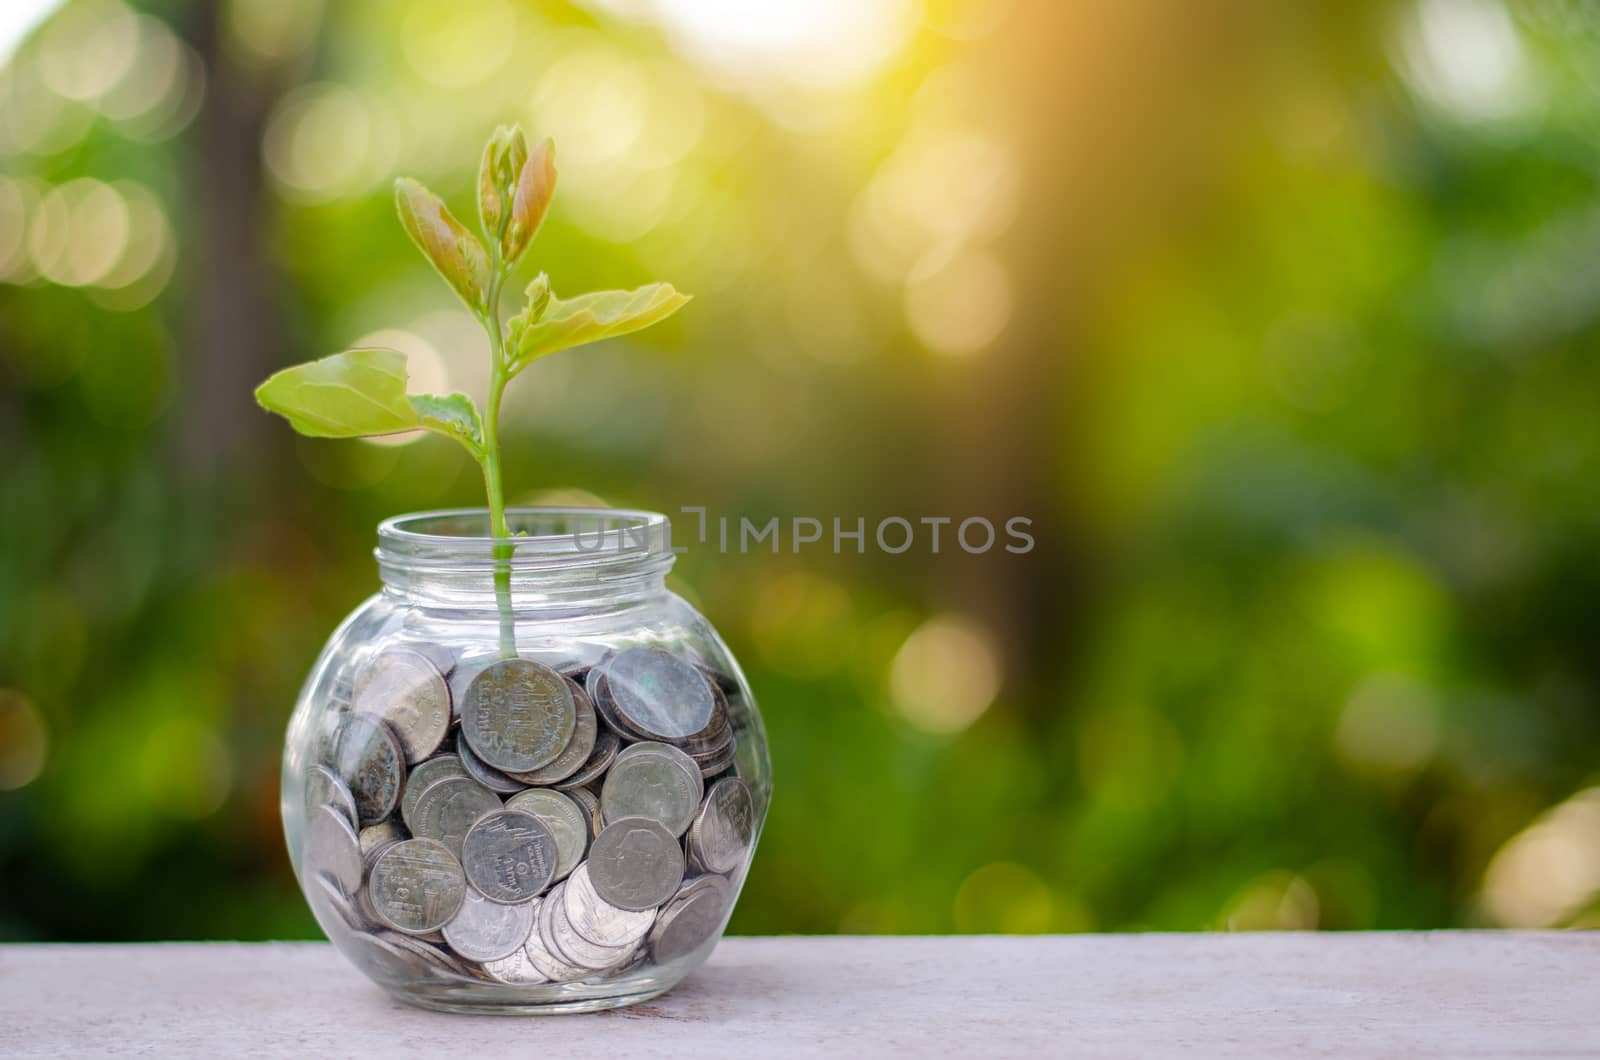 money Bottle Banknotes tree Image of bank note with plant growing on top for business green natural background money saving and investment financial concept by sarayut_thaneerat